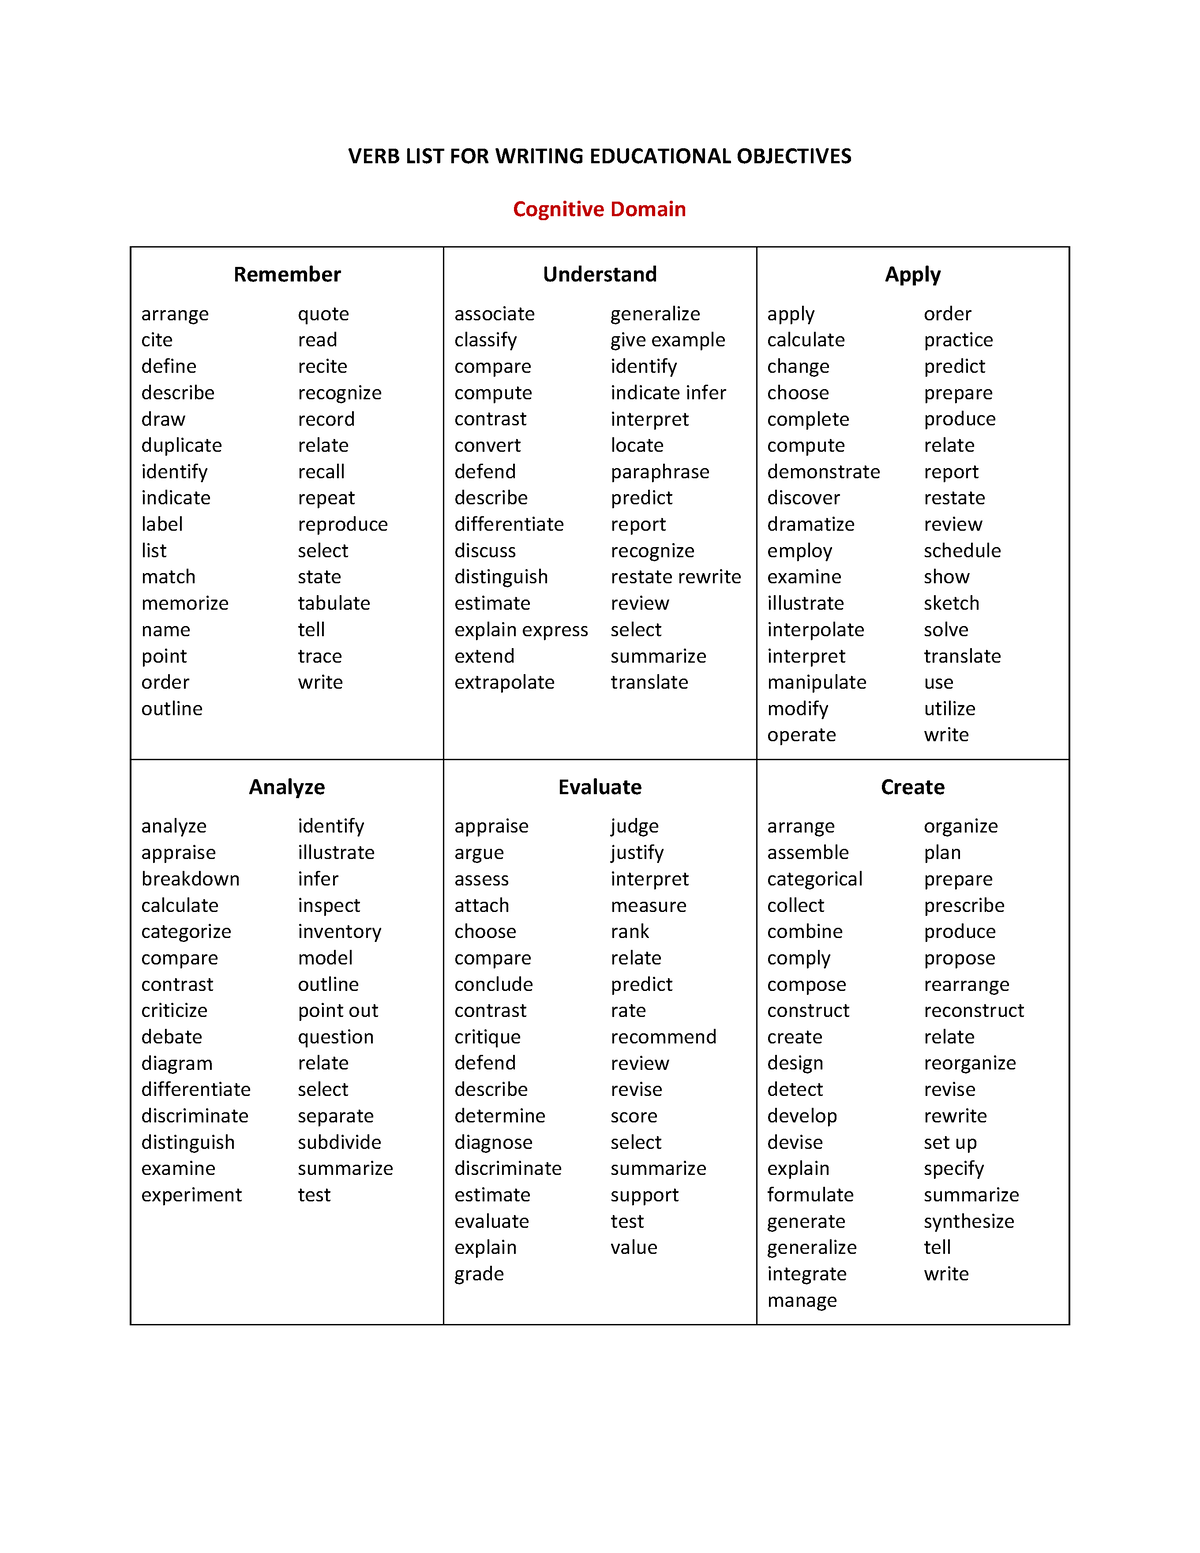 ksa-verbs-verb-list-for-writing-educational-objectives-cognitive